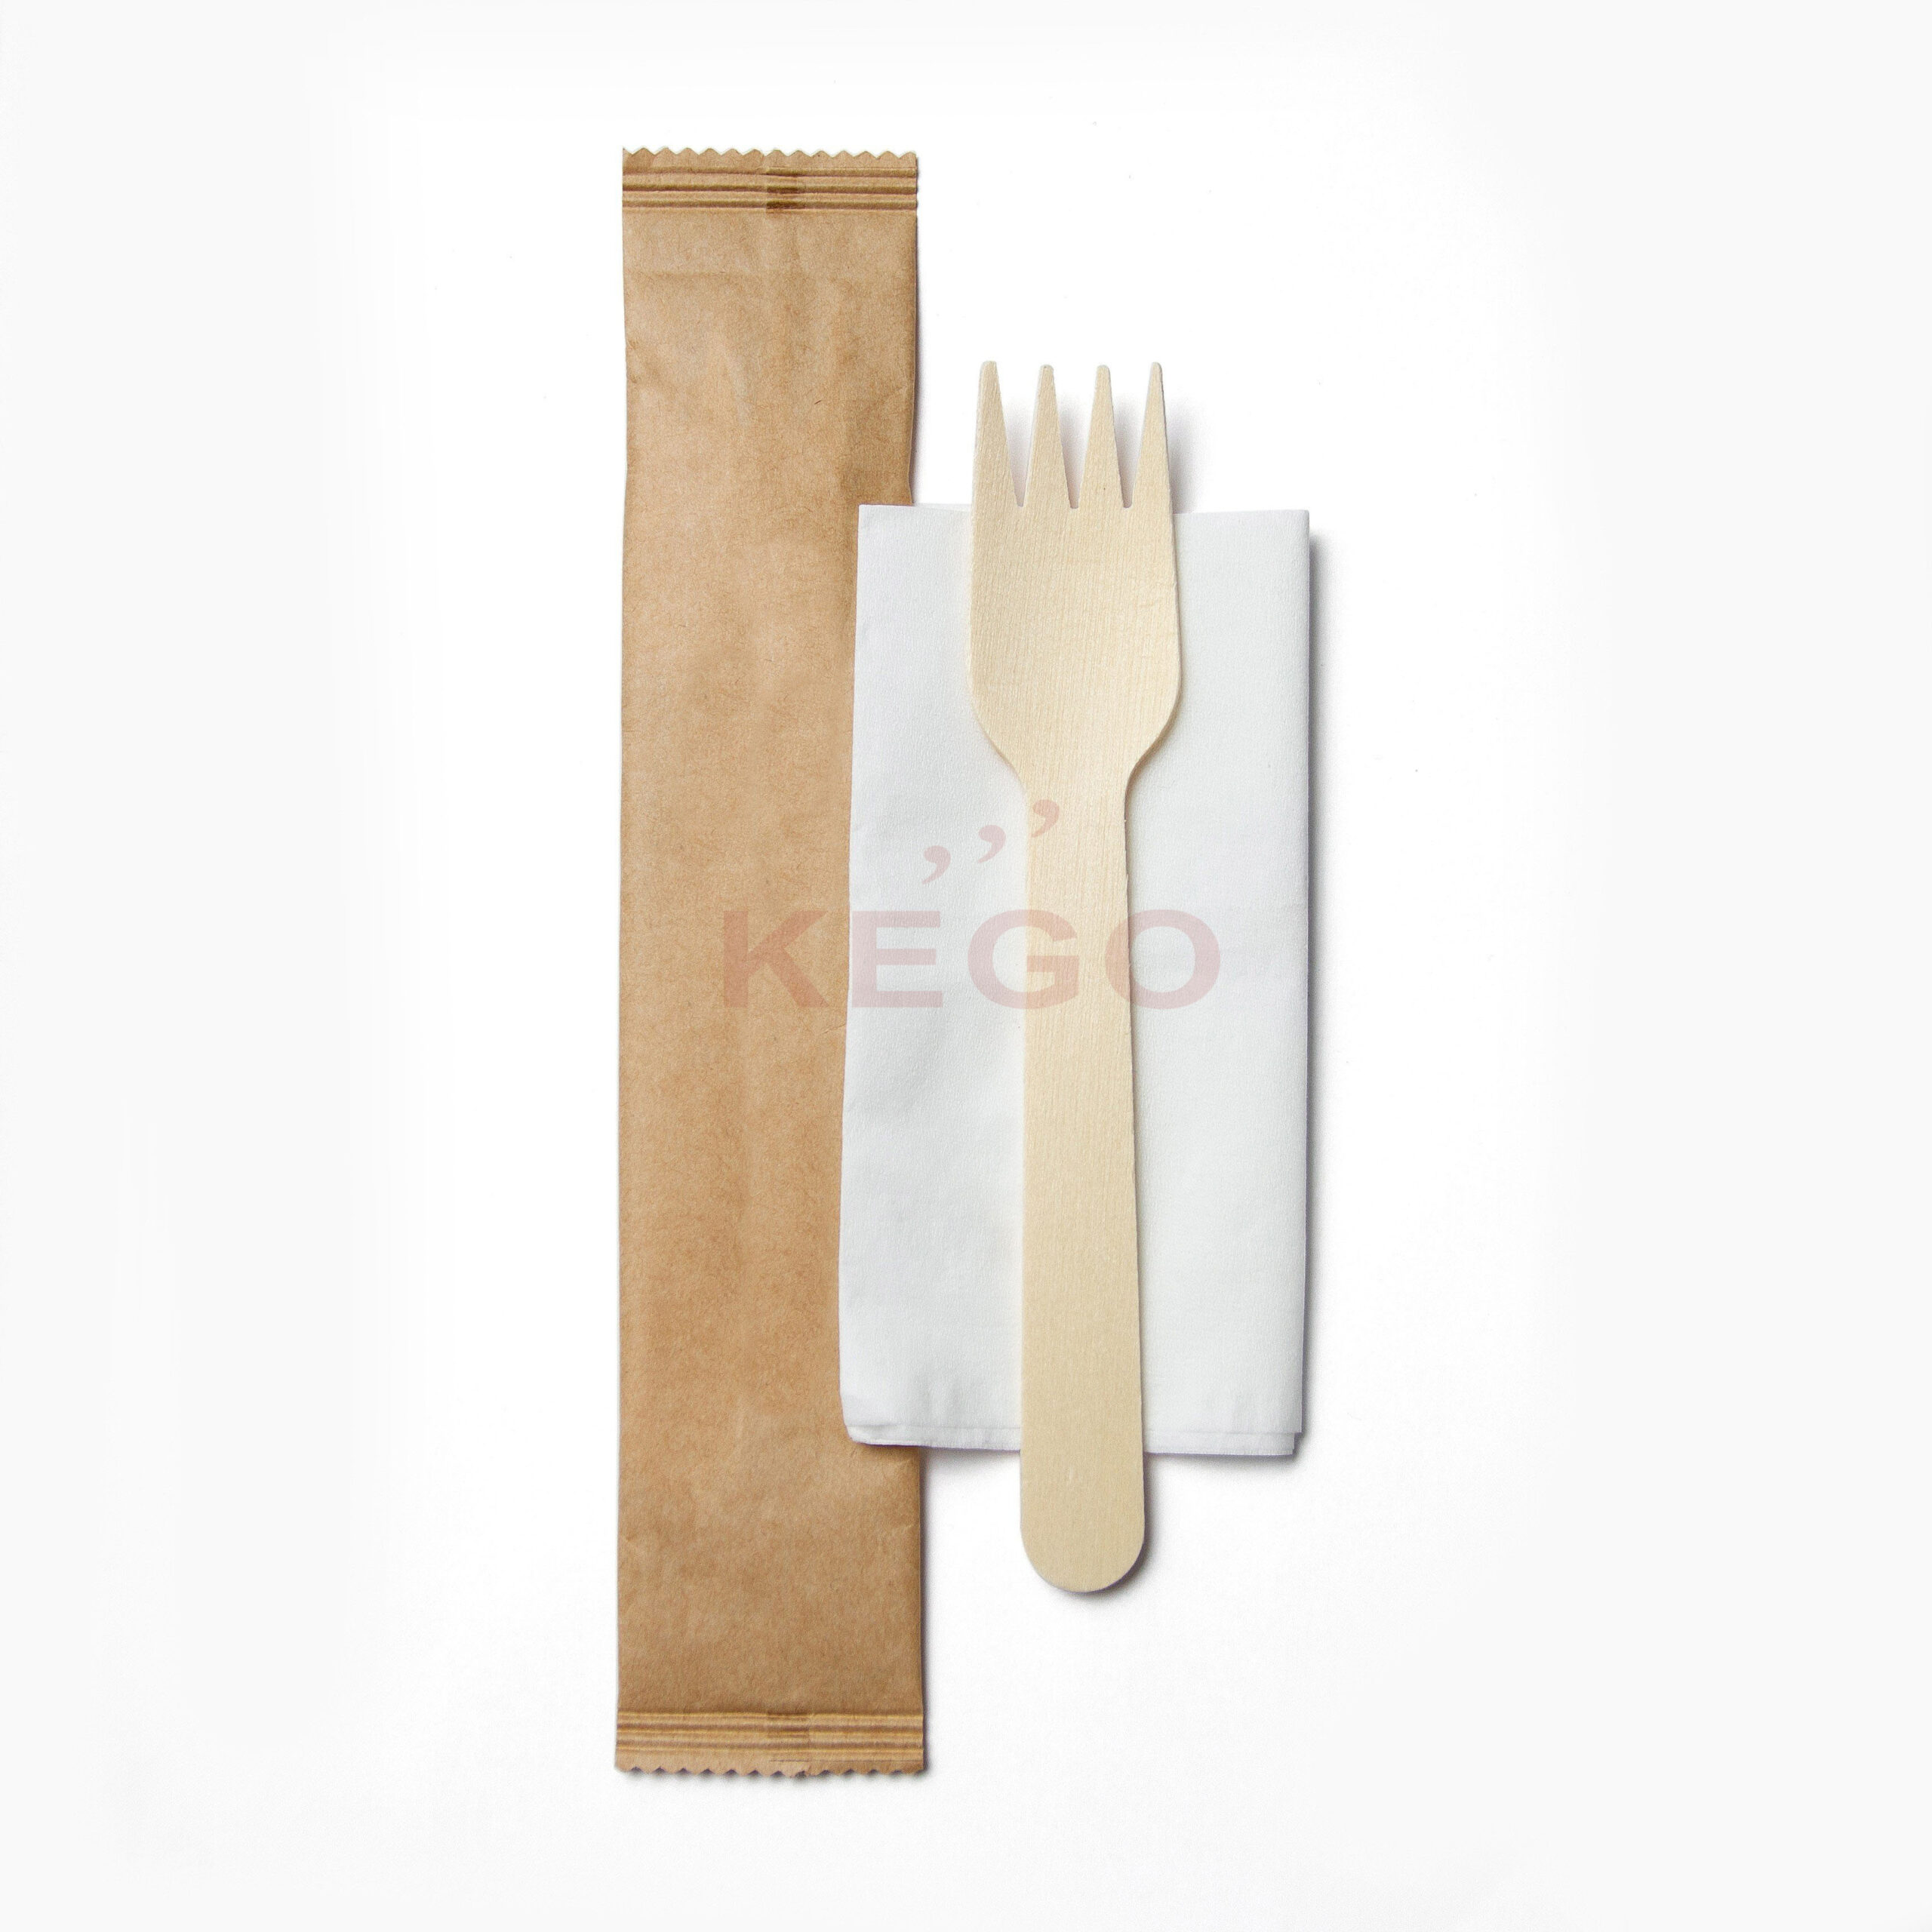 https://disposablewoodencutlery.com/wp-content/uploads/2015/09/Mix-Set-With-Napkin-3-1-scaled.jpg